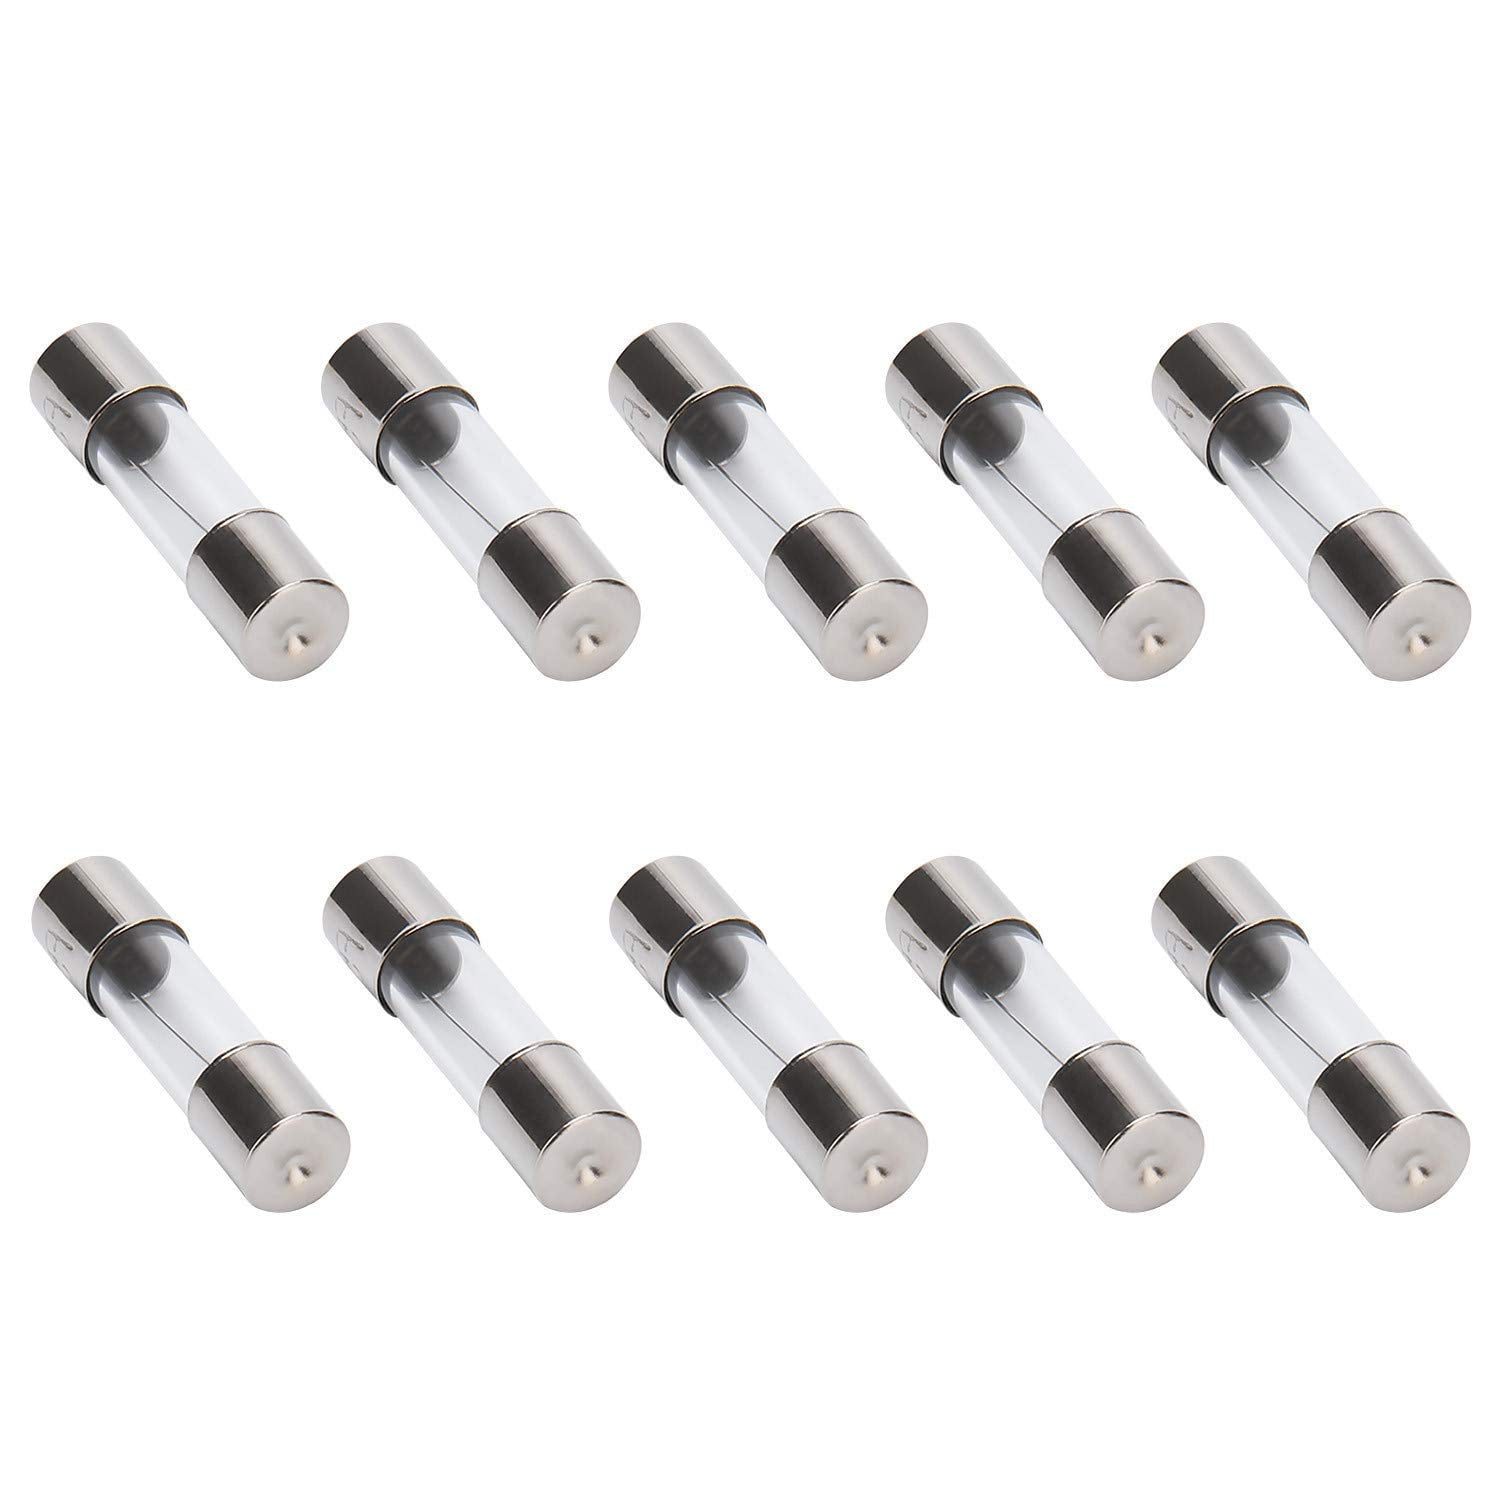 1A to 5A 5 X 20mm x 5mm Fast Acting Quick Blow Glass Fuses Superior Quality. 